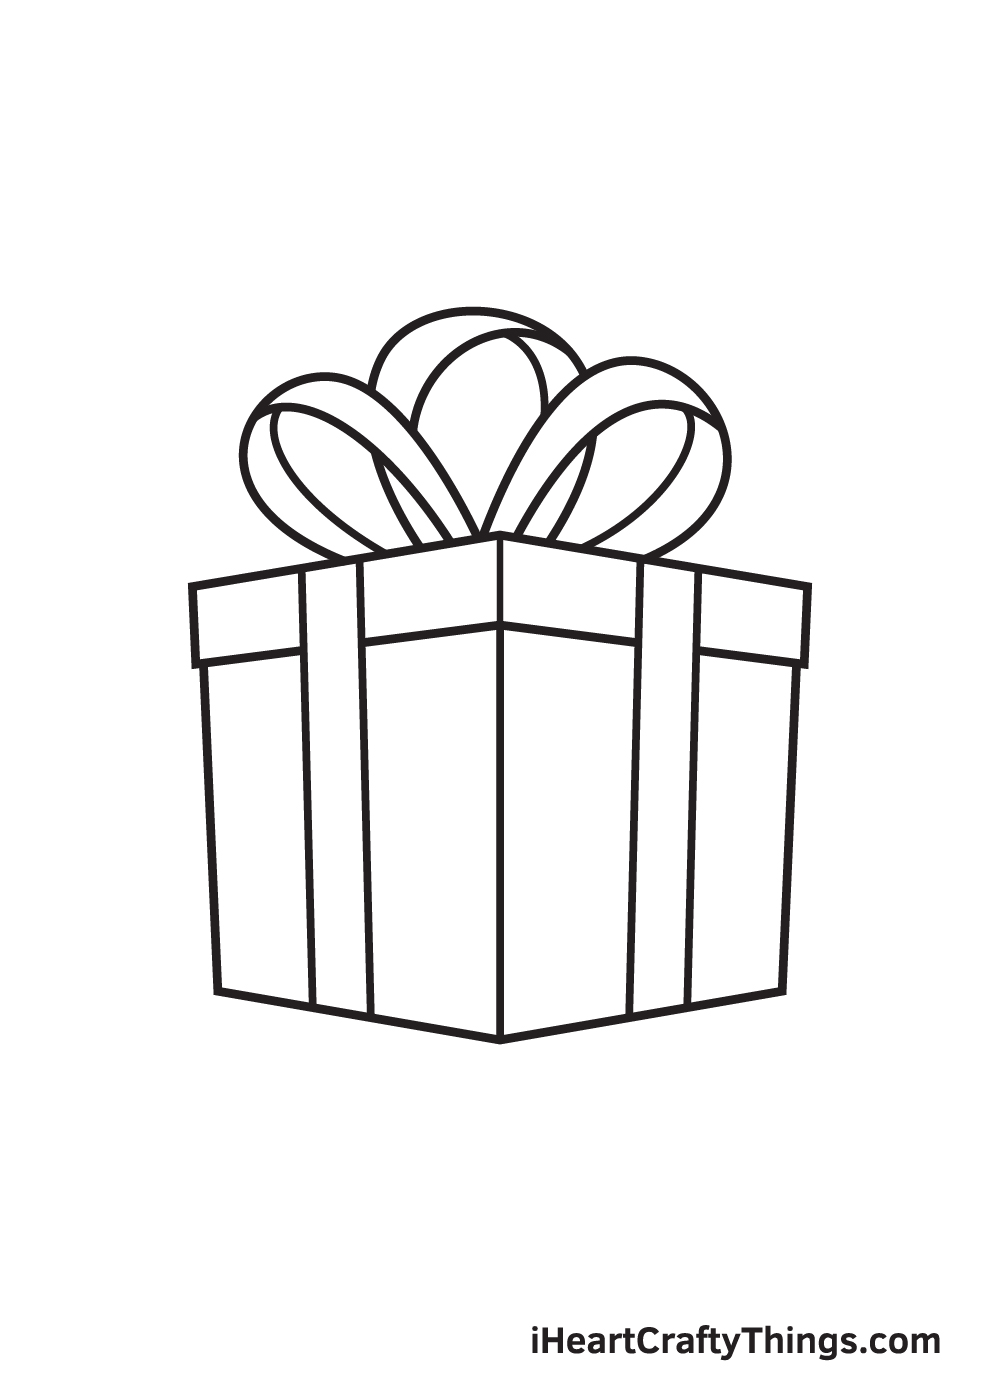 How to Draw Christmas Presents - How to Draw Easy